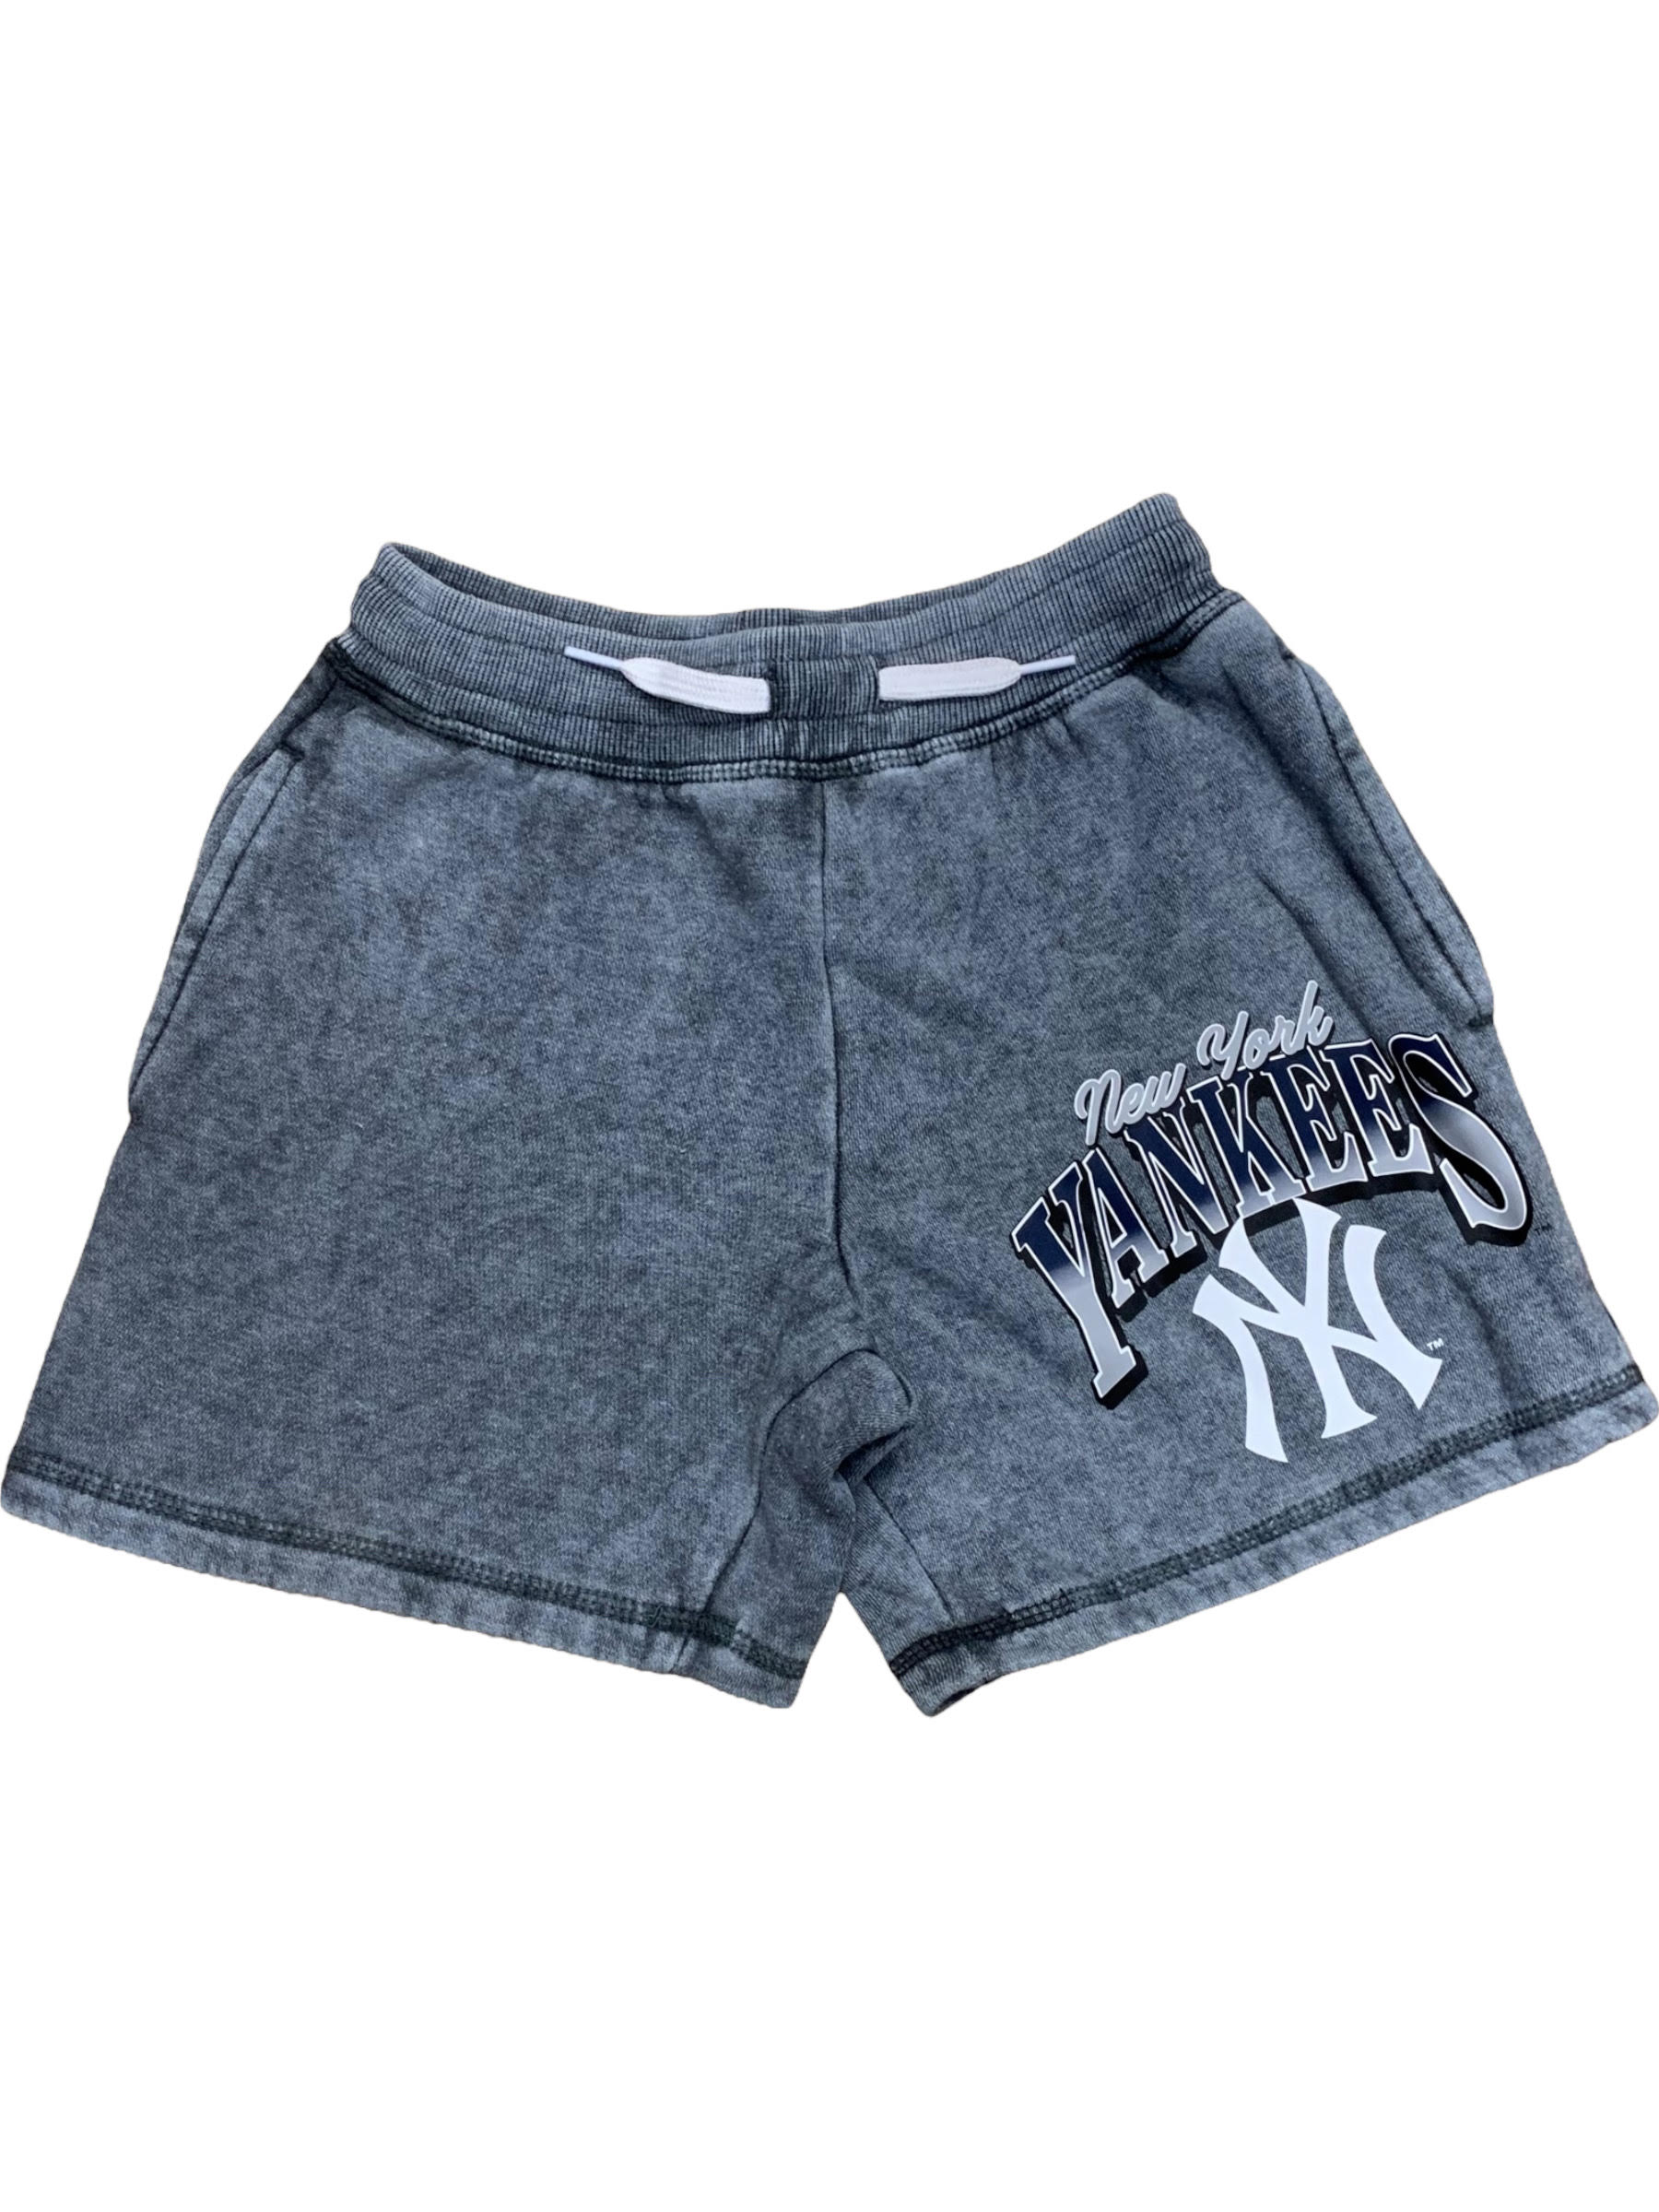 Outerstuff New York Yankees Youth Highlights Shorts 22 / L